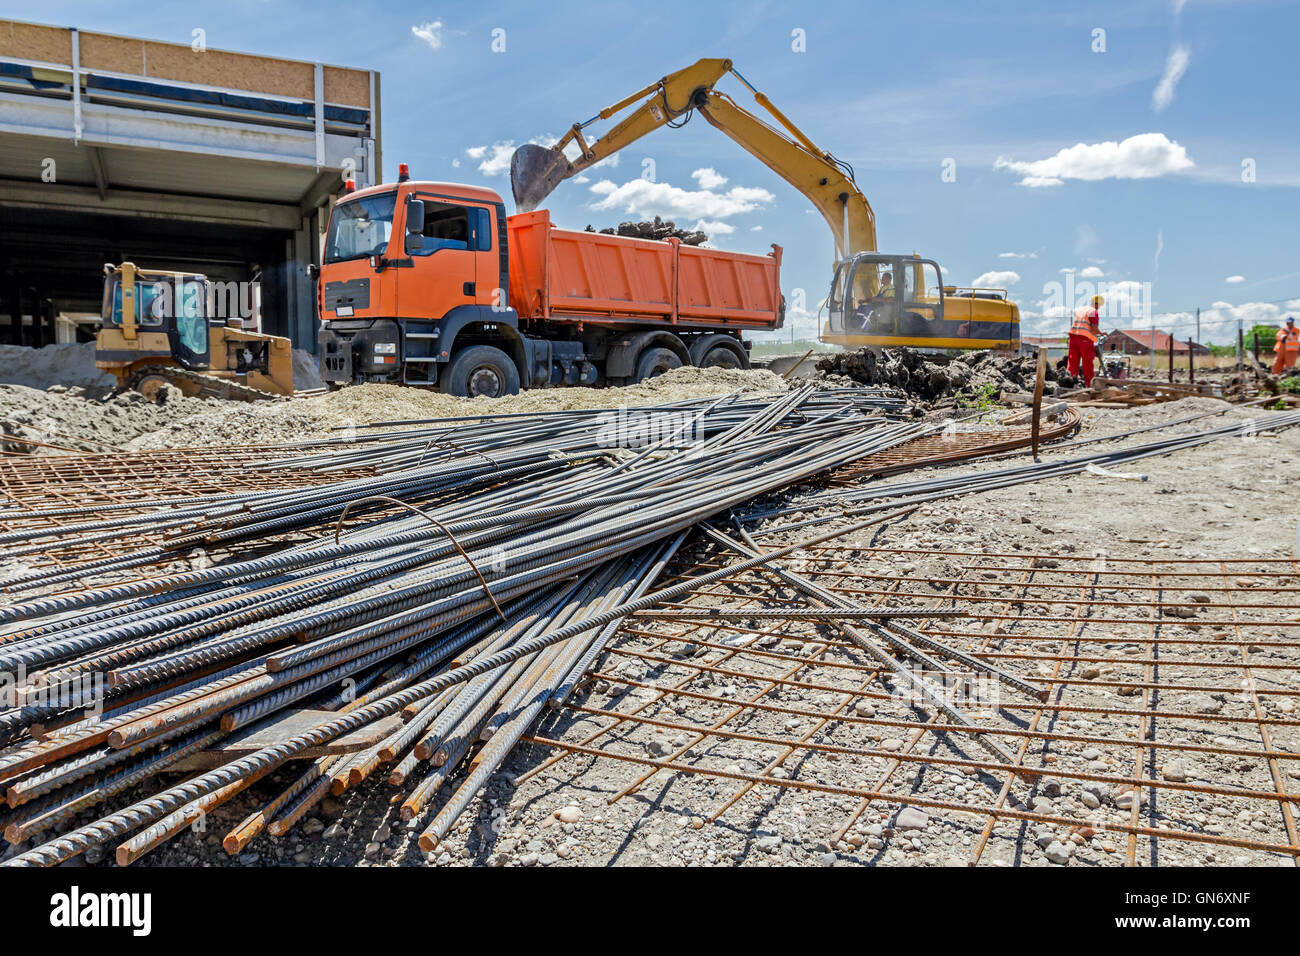 View on rusty square reinforcement for concrete, steel bars, construction site is in background. Stock Photo